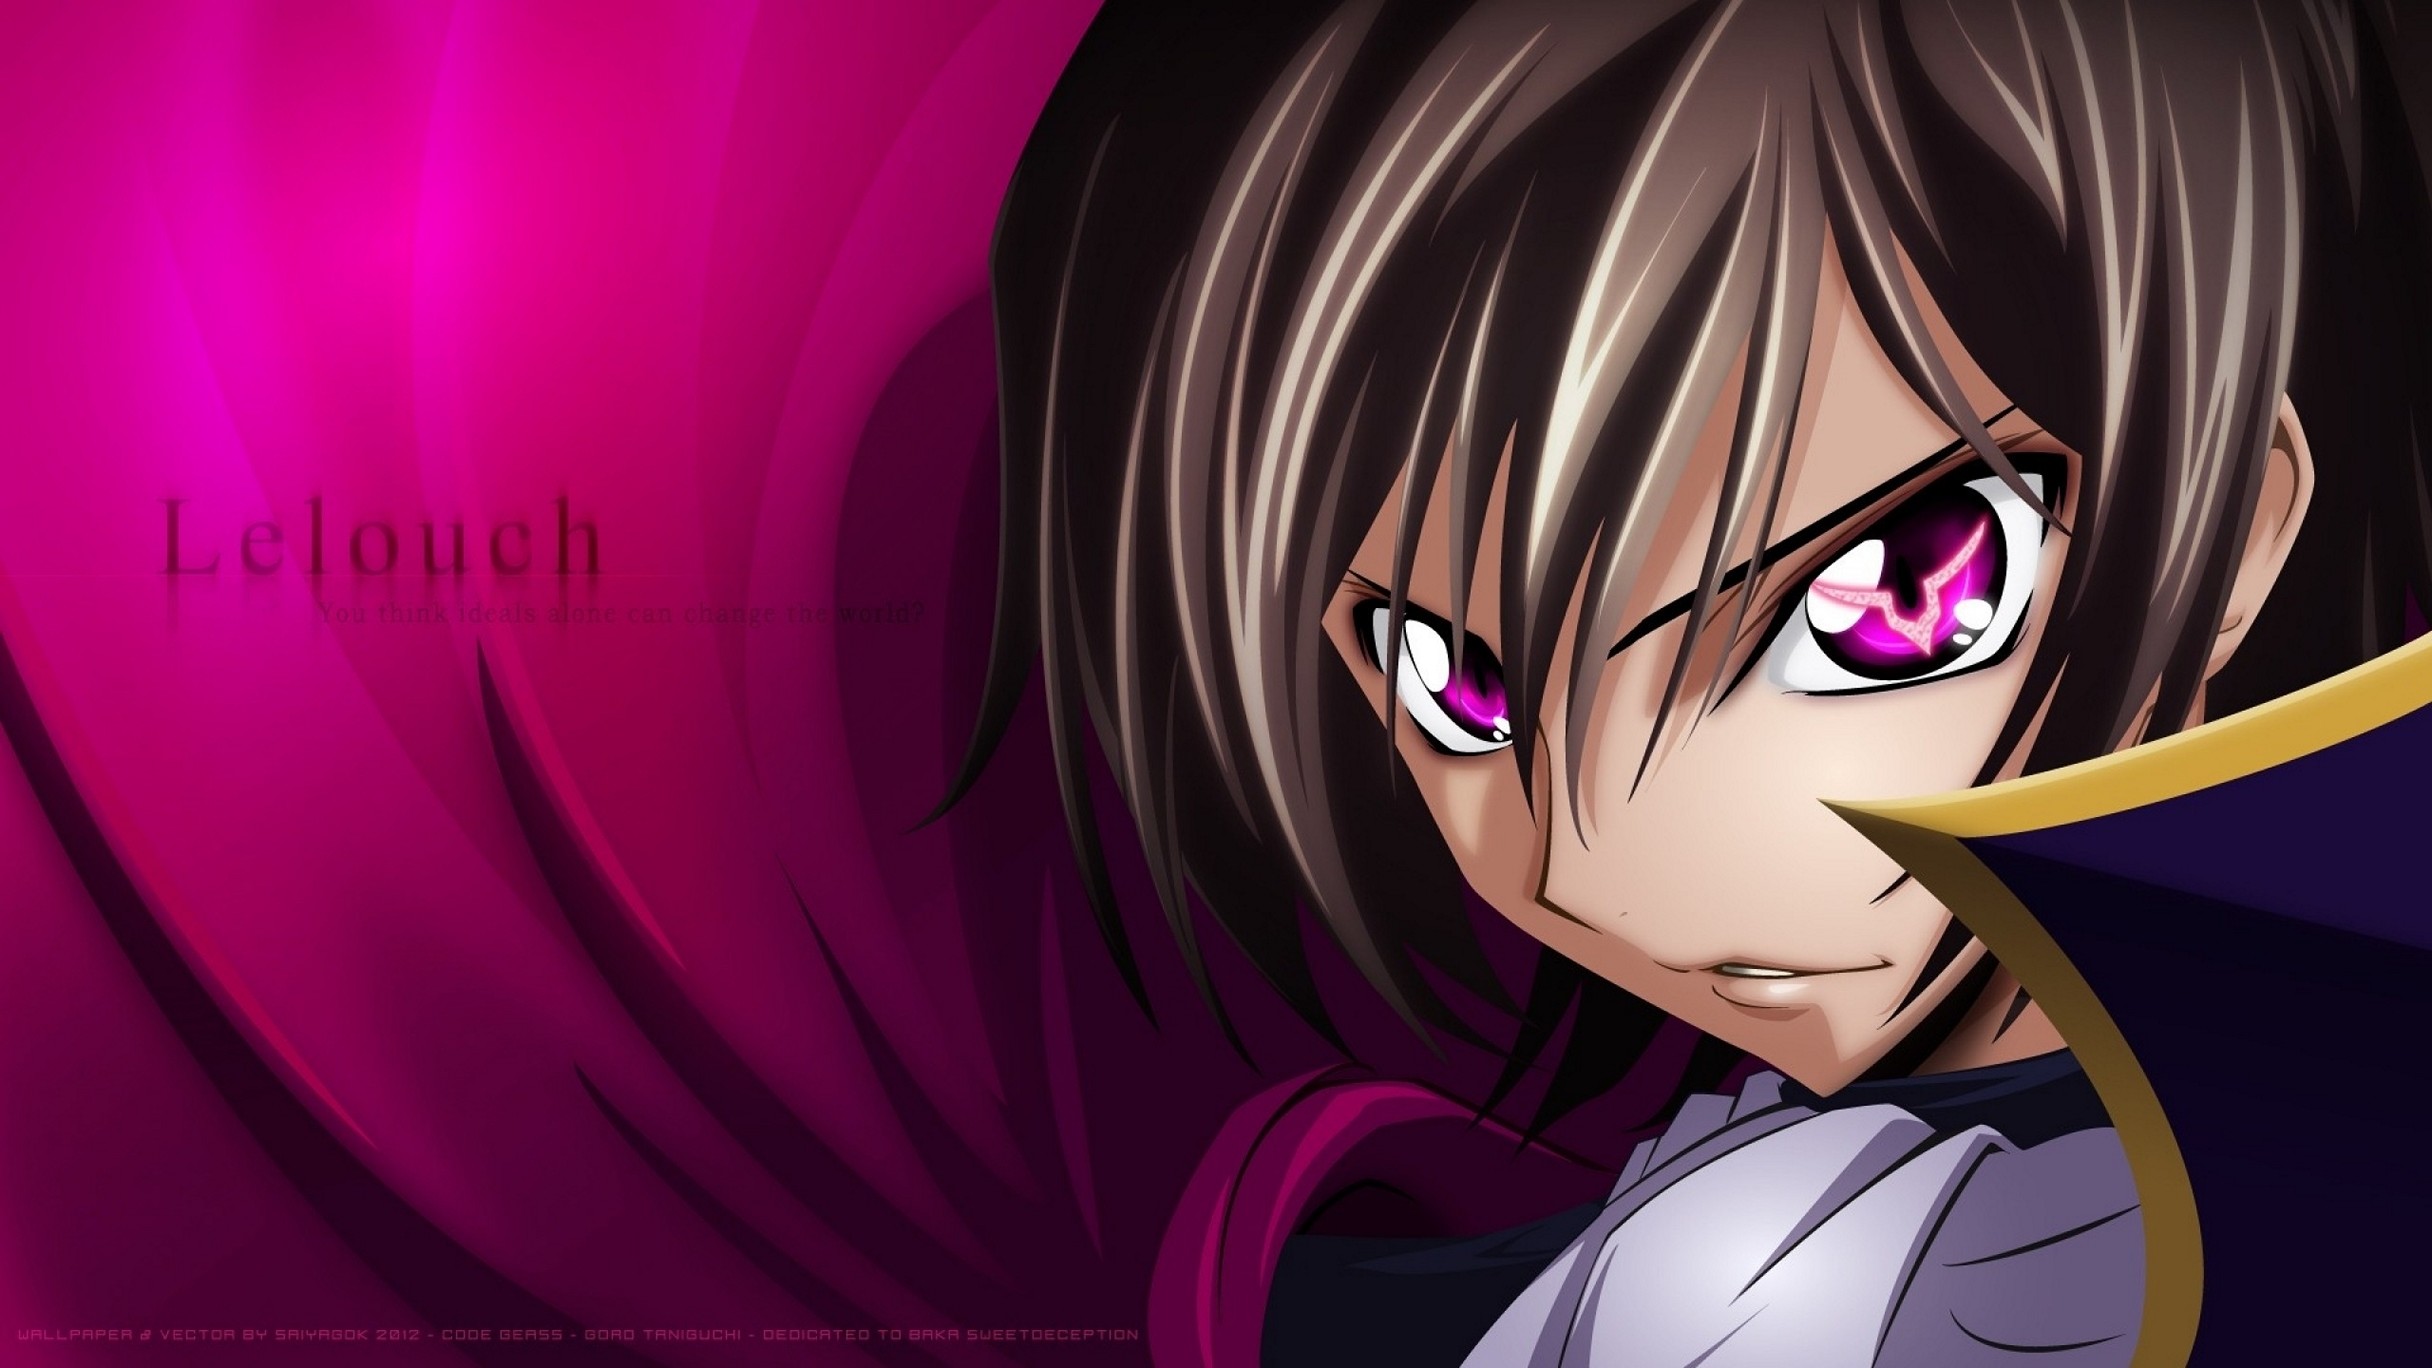 2432x1368 Code Geass Lelouch Lamperouge Face Anime Wallpaper 1080p Full Hd OmA810